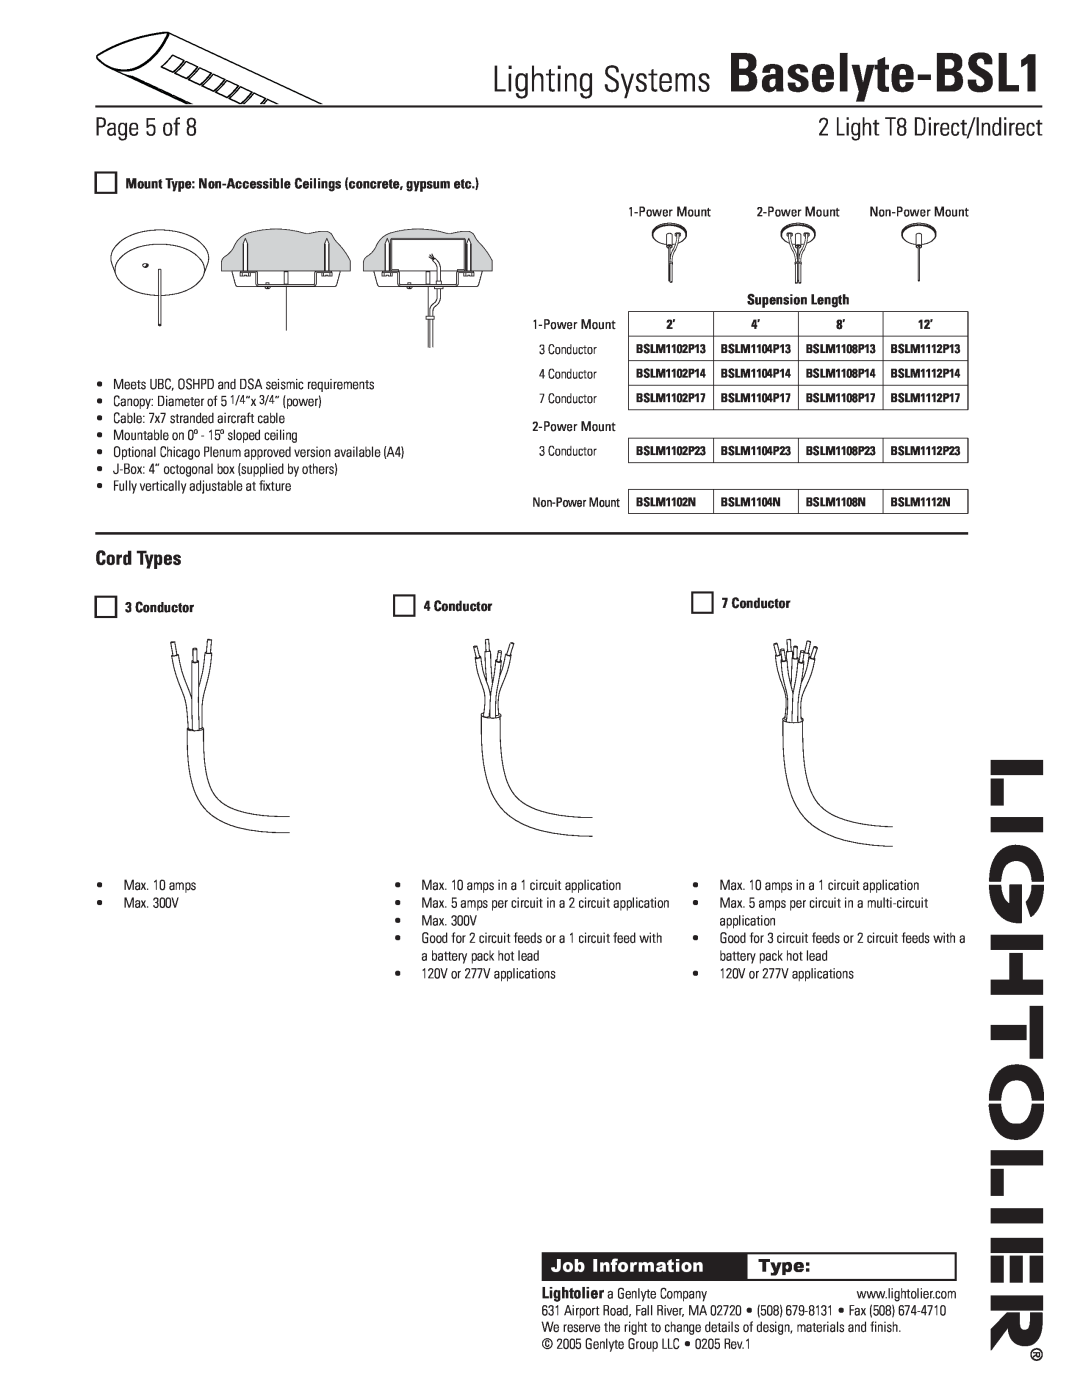 Lightolier Cord Types, Conductor, Lighting Systems Baselyte-BSL1, Page of, Light T8 Direct/Indirect, Job Information 